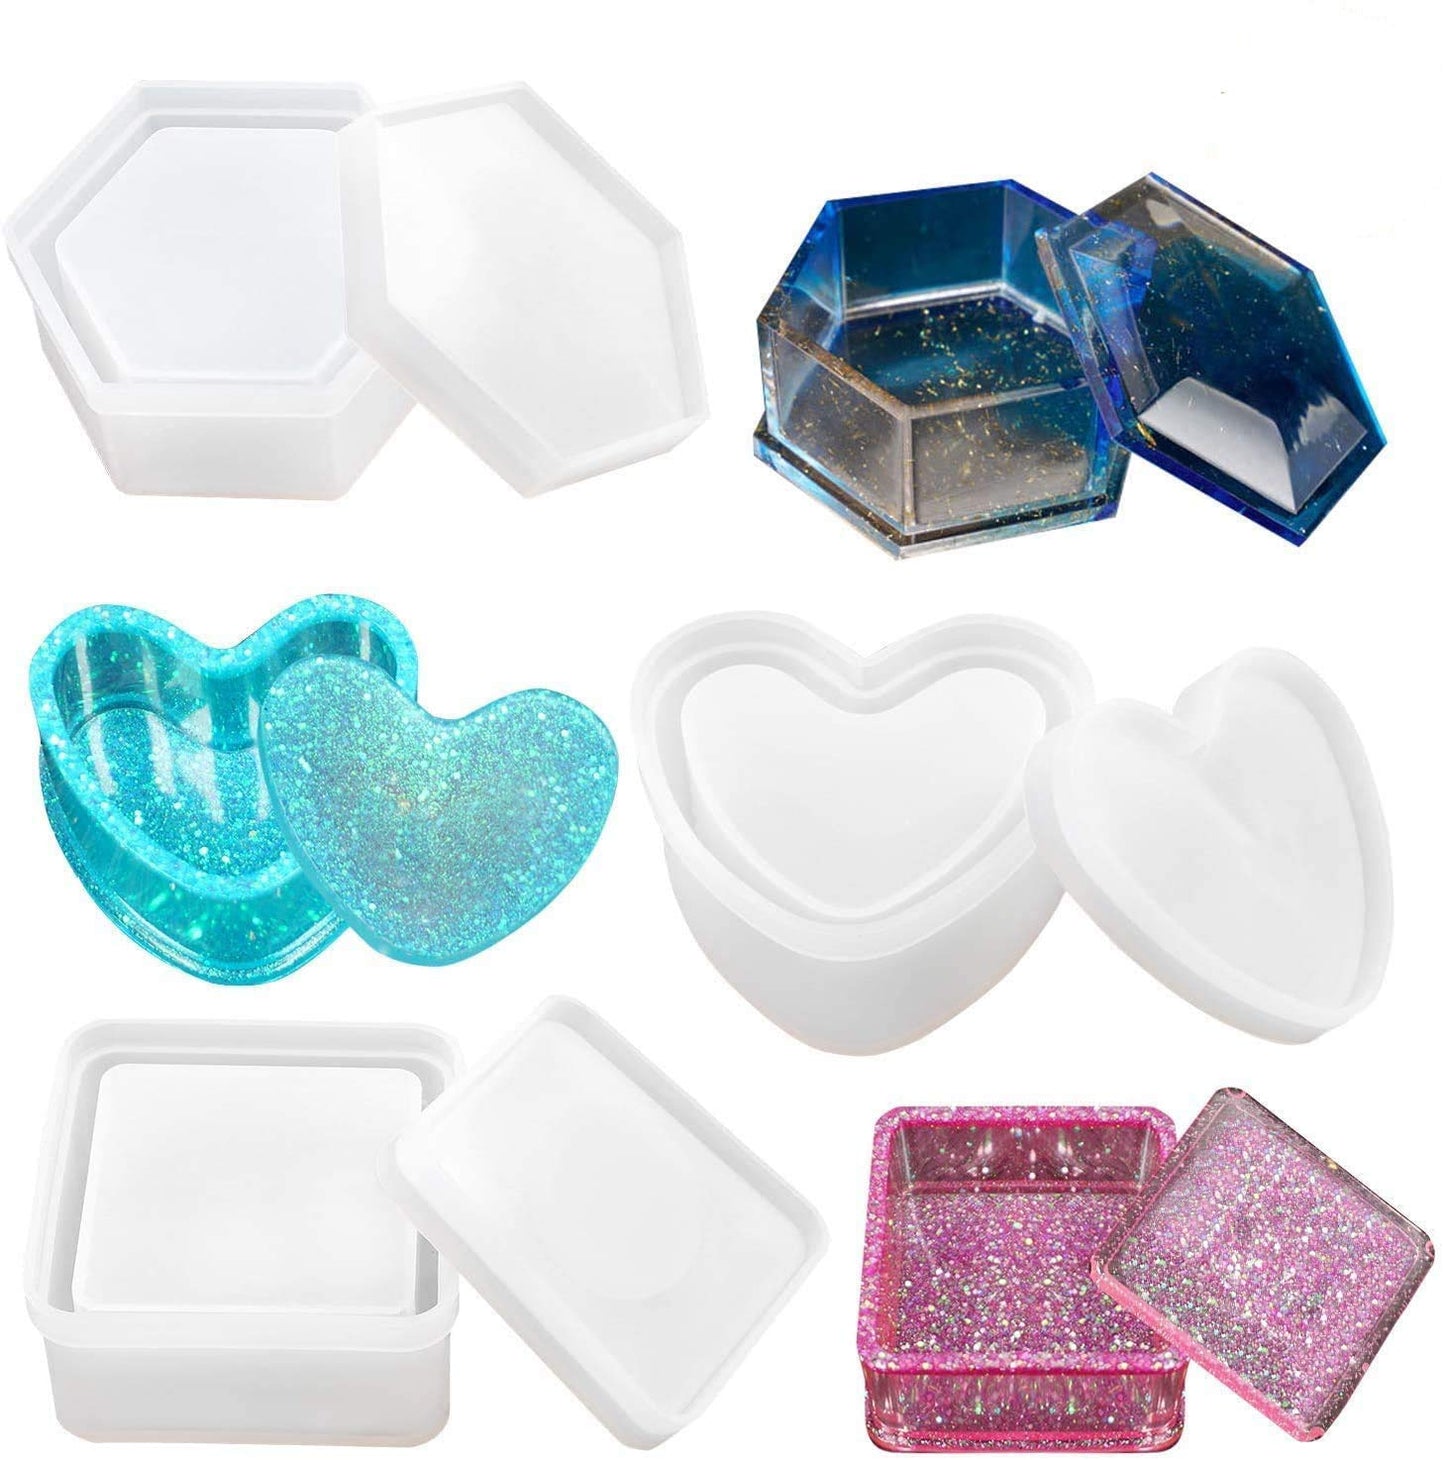 Box Resin Molds, Jewelry Box Molds with Heart Shape Silicone Mold, Hexagon Storage Box and Square Epoxy Molds for Making Resin Molds